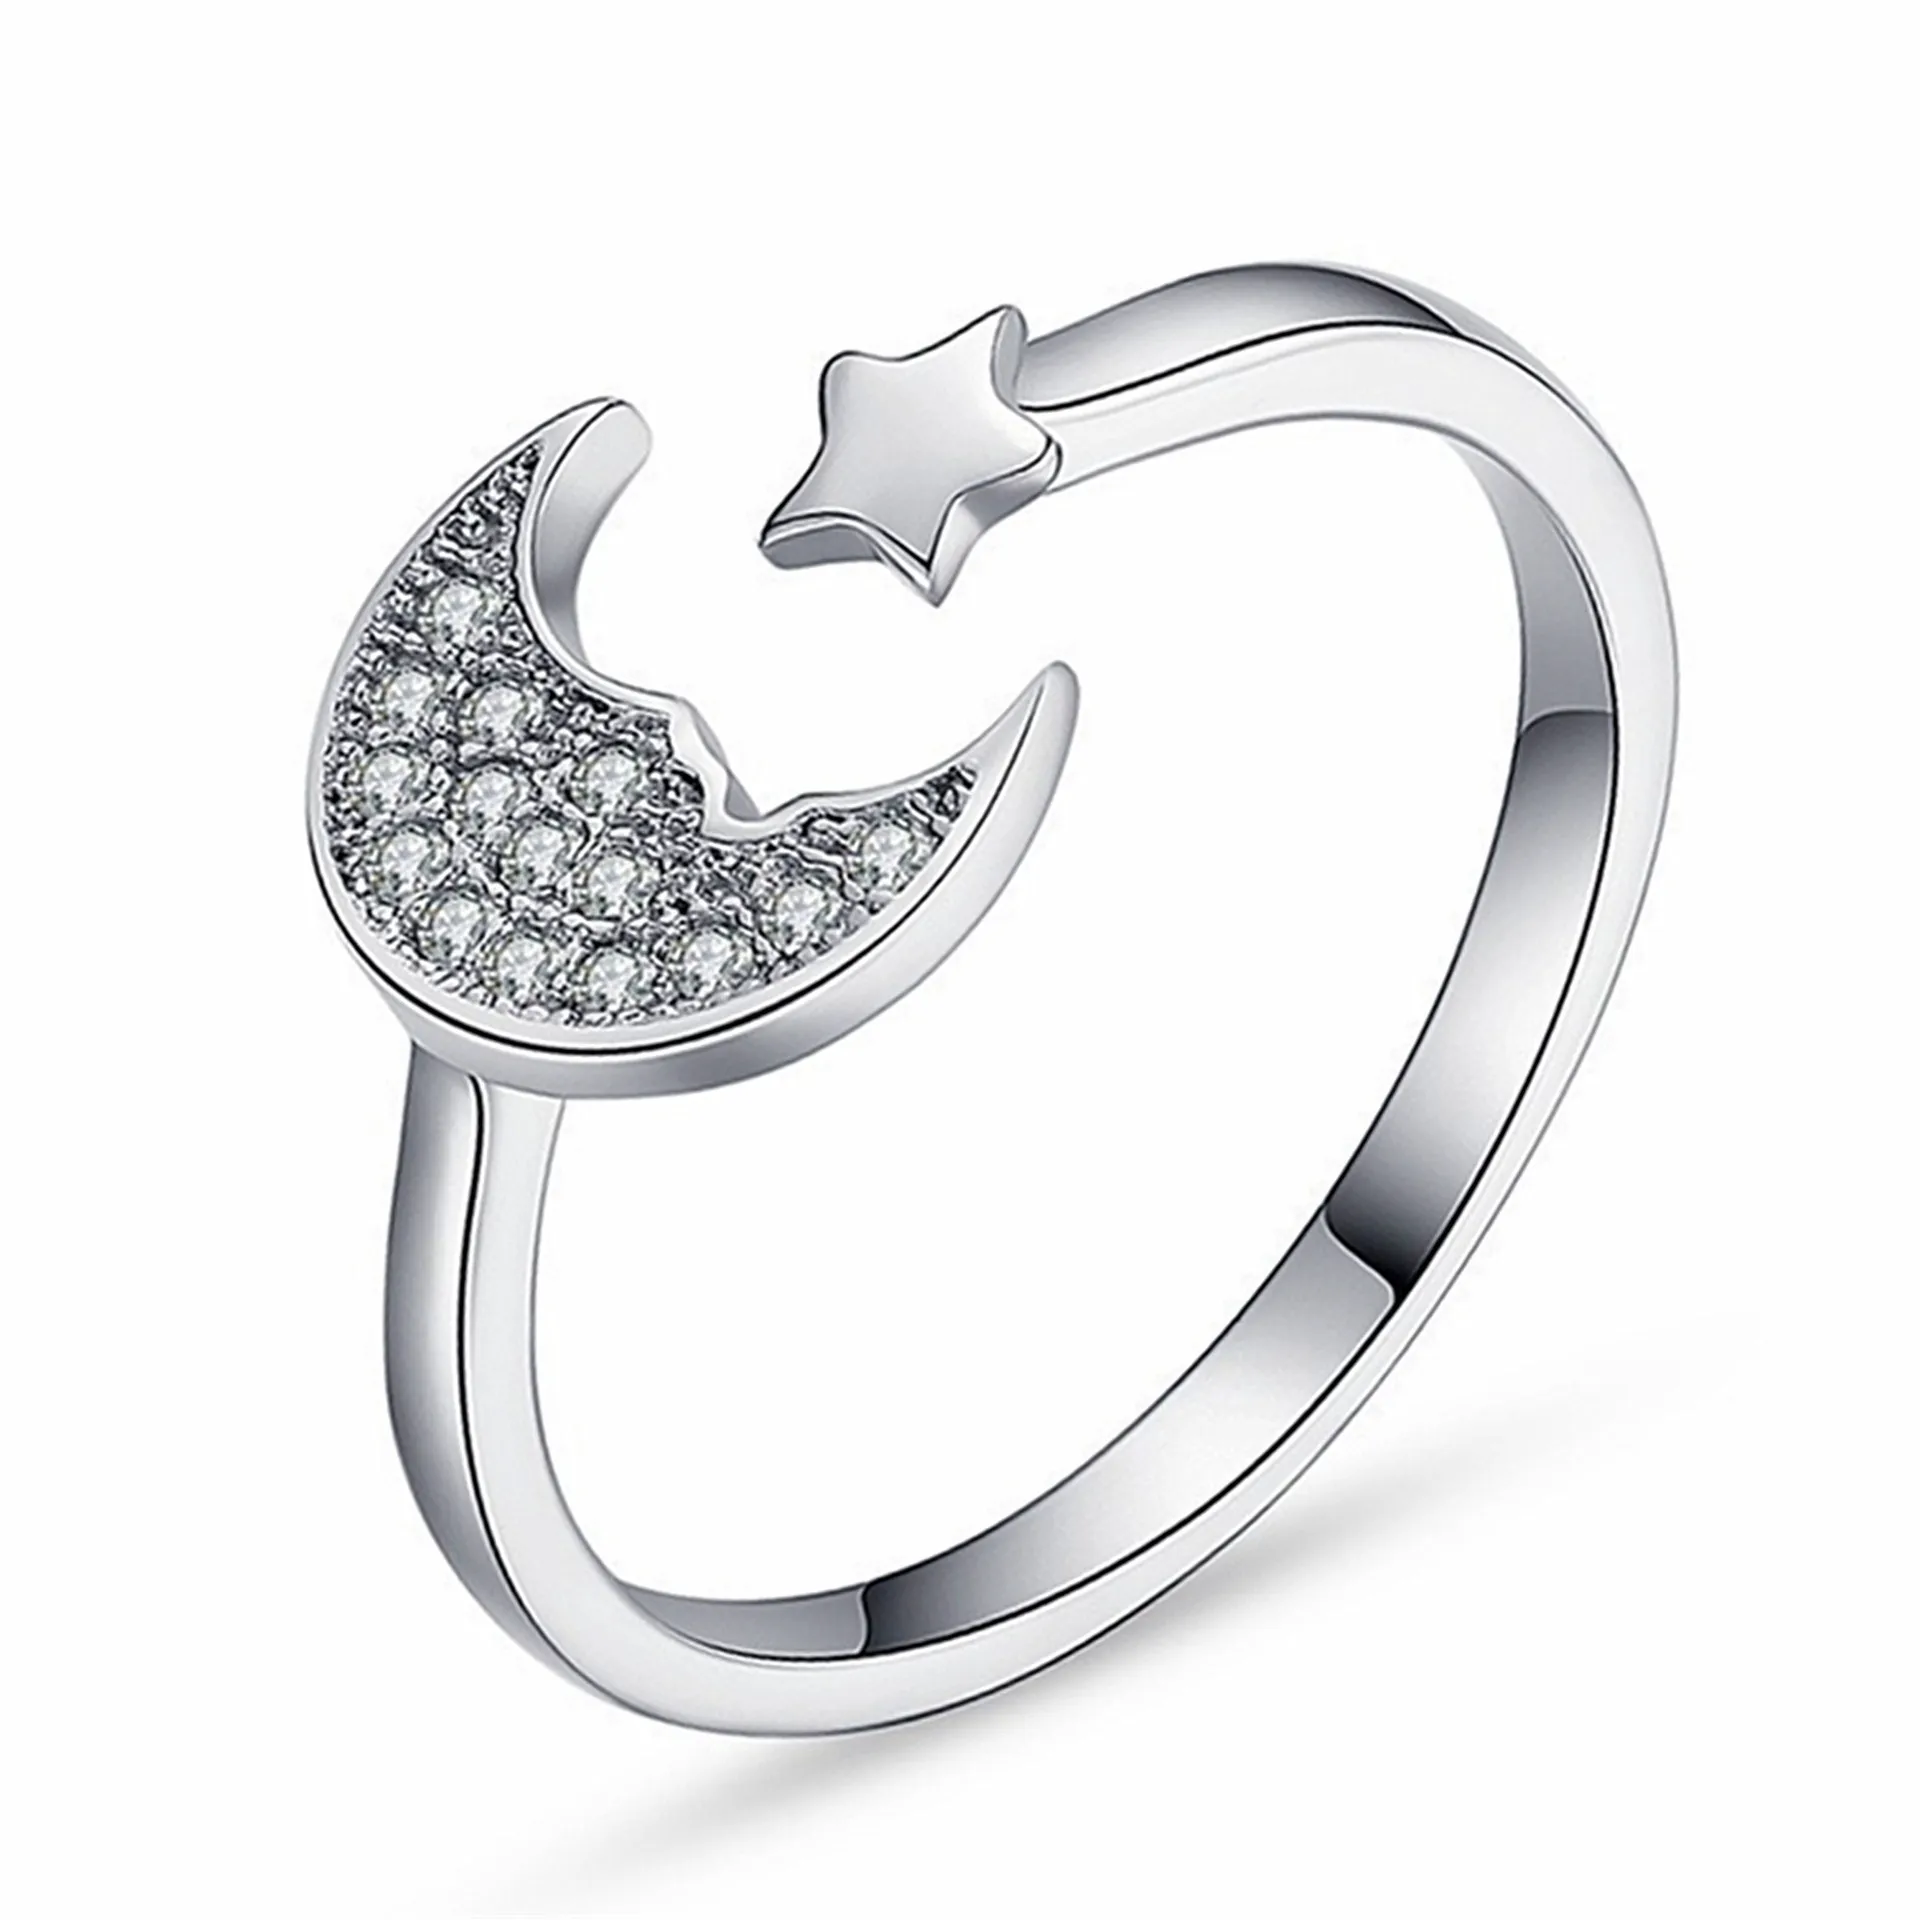 Crystal Moon Star Rings Silver open adjustable ring fashion jewelry gift will and sandy